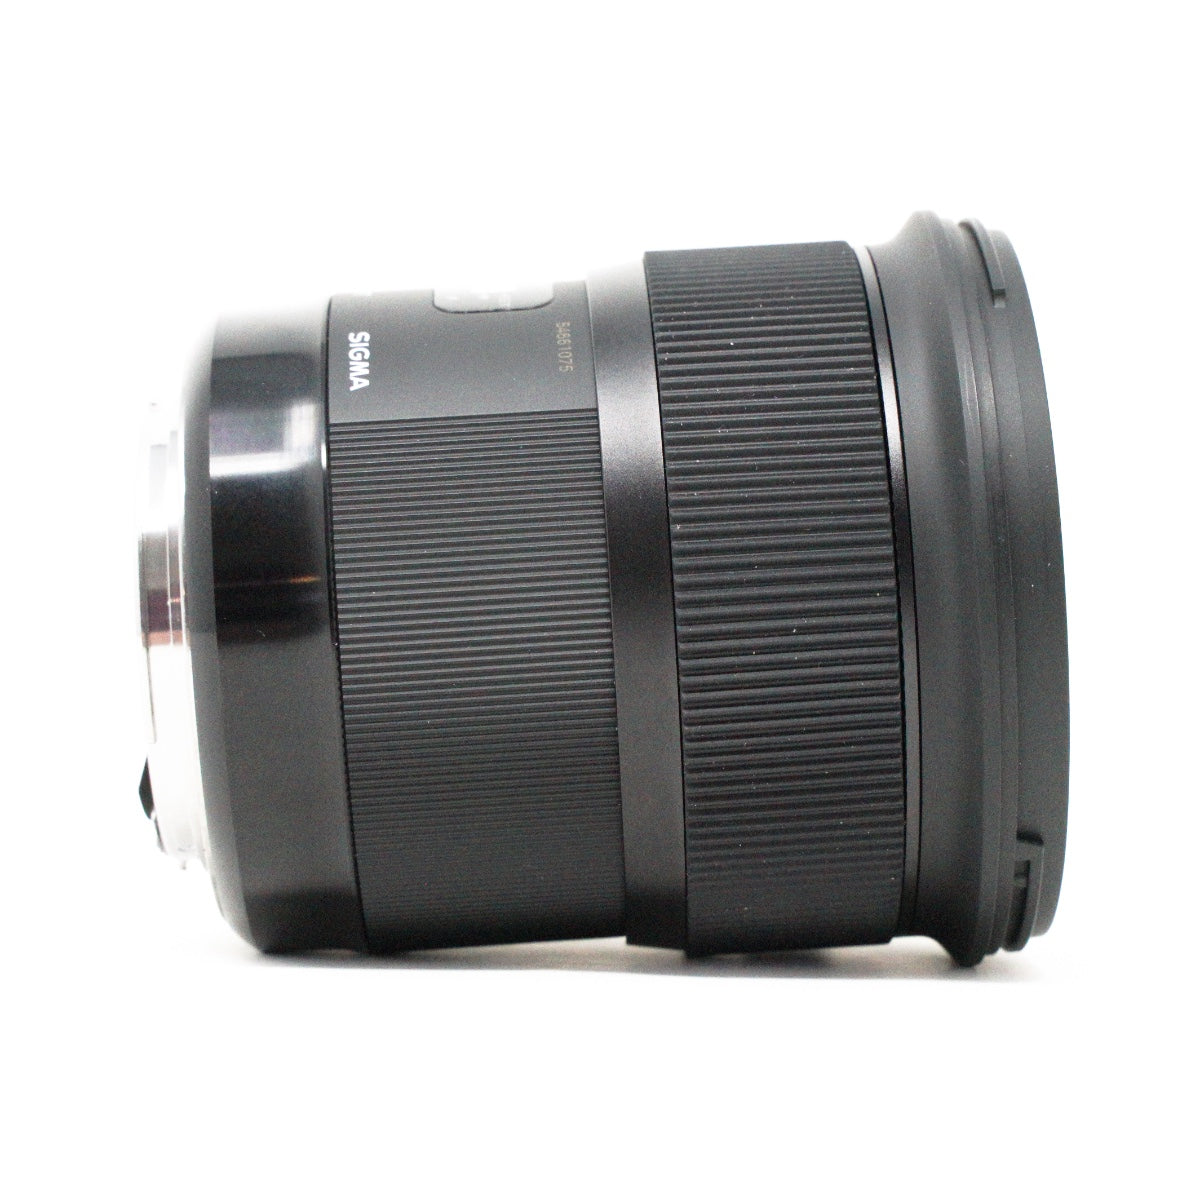 USED Sigma 24mm F1.4 DG HSM A Series Canon fit Lens